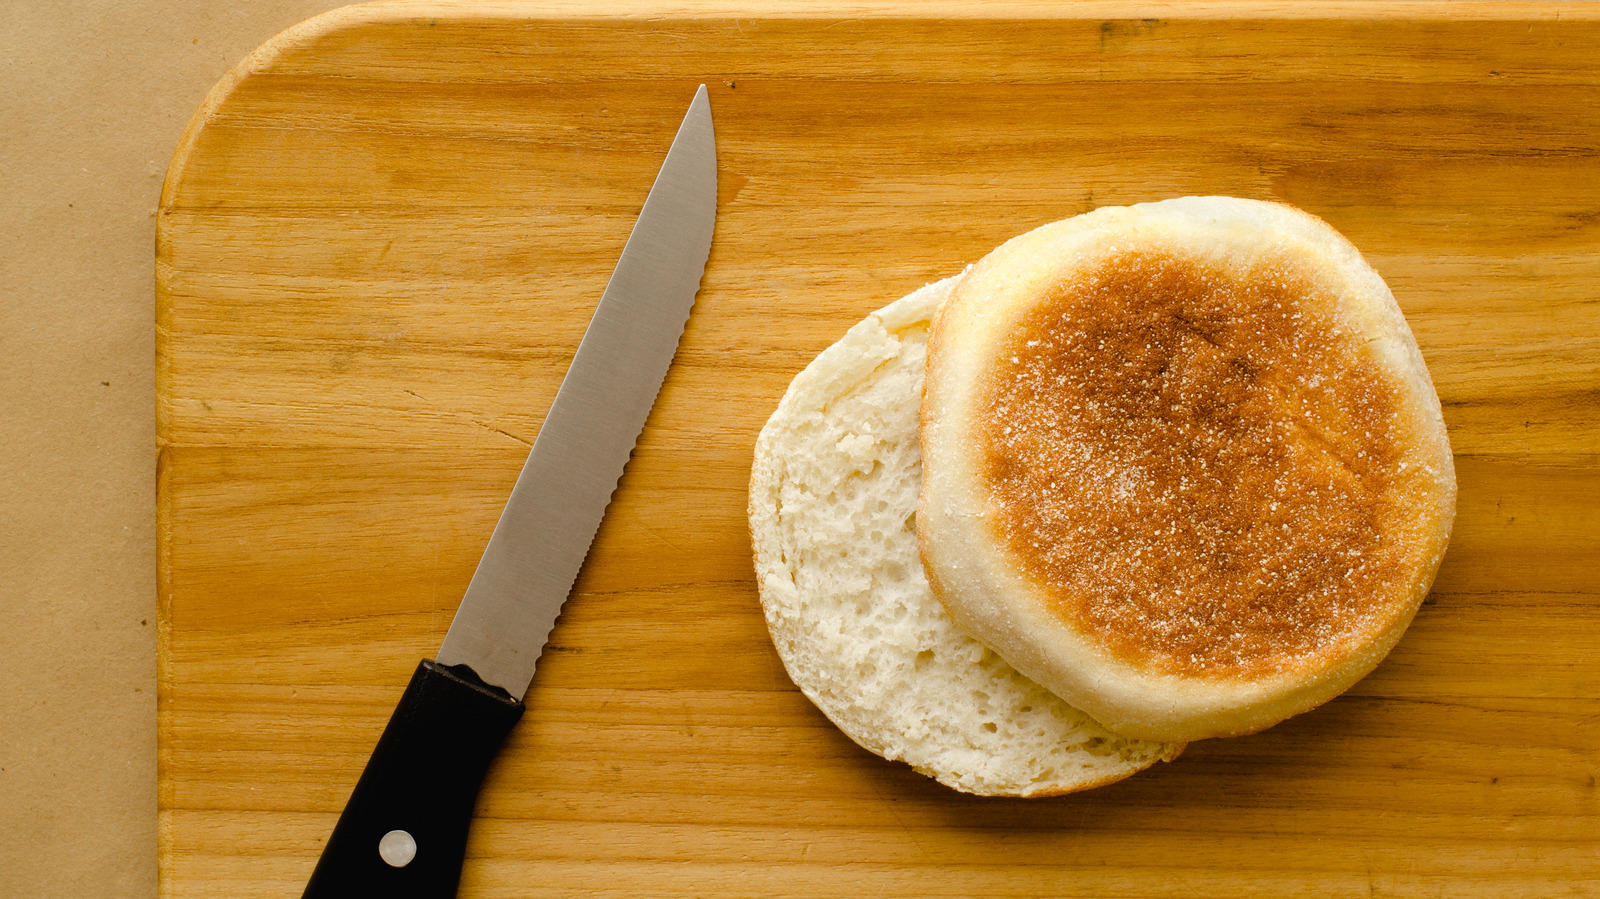 https://www.thedailymeal.com/img/gallery/why-its-a-frankly-terrible-idea-to-cut-english-muffins-with-a-knife/l-intro-1681150191.jpg